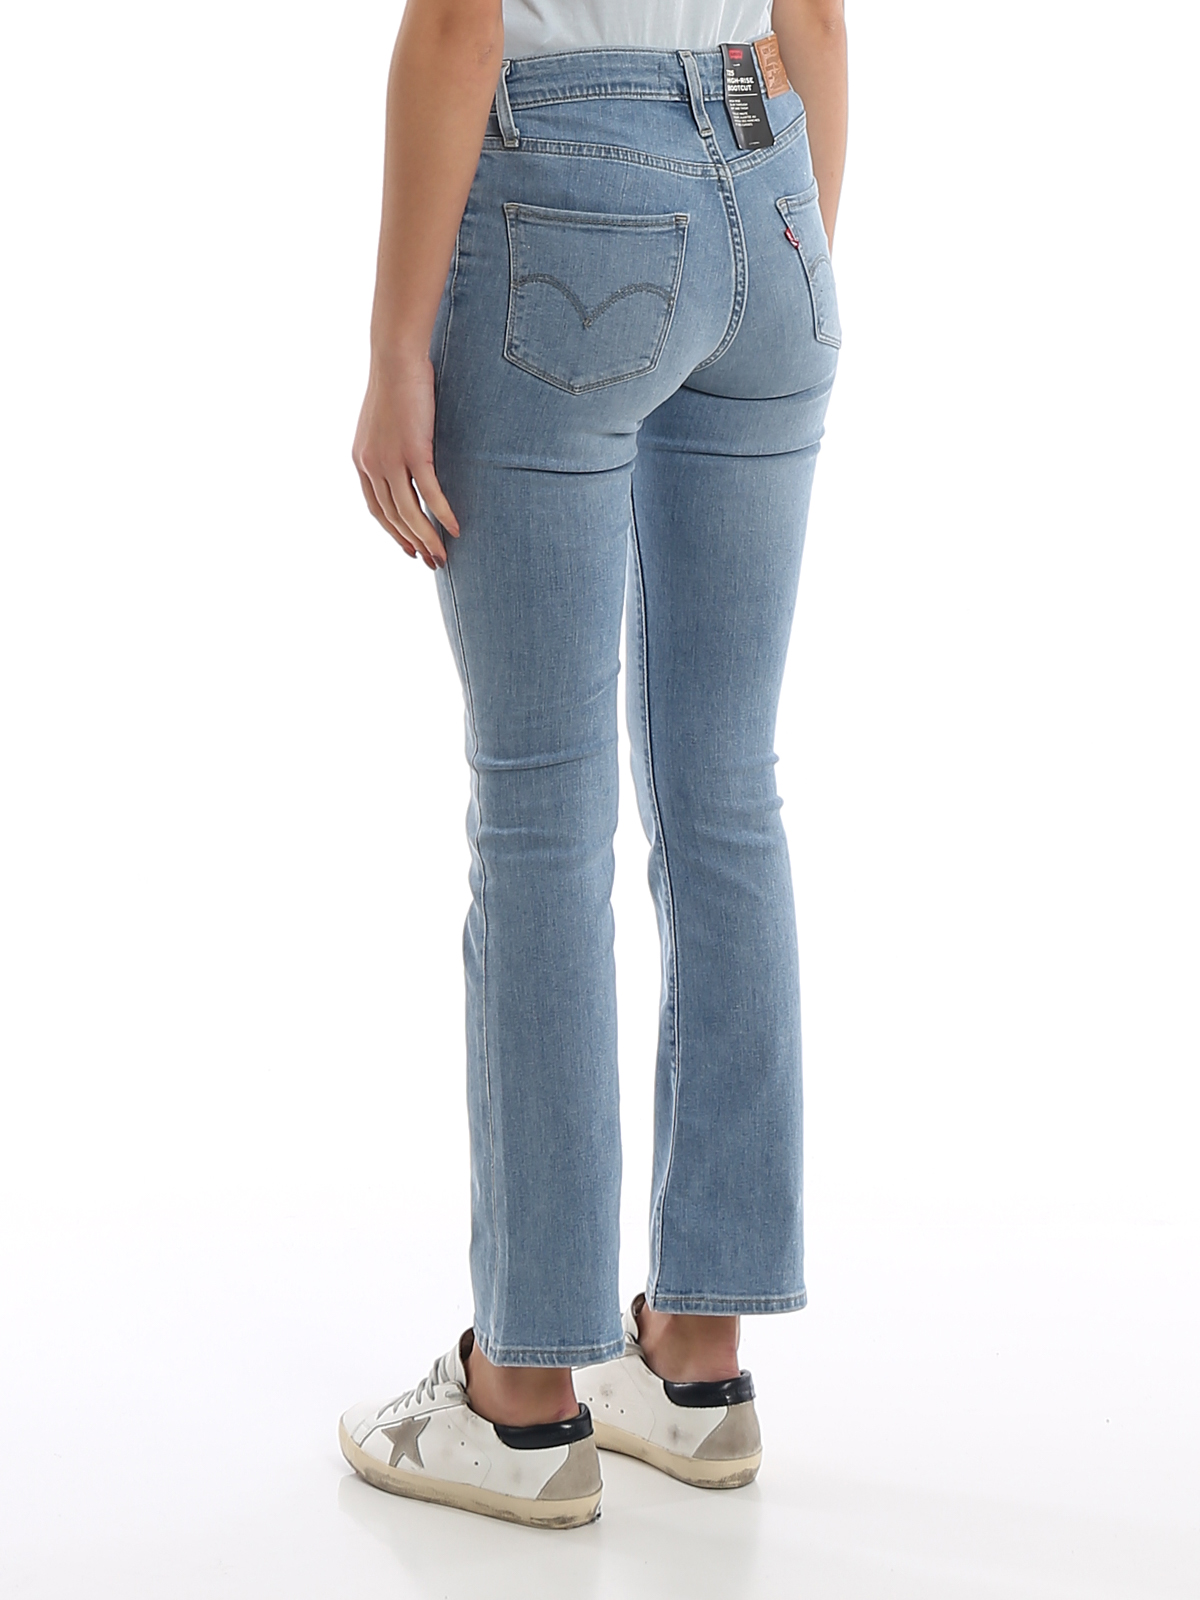 levi high waisted jeans bootcut